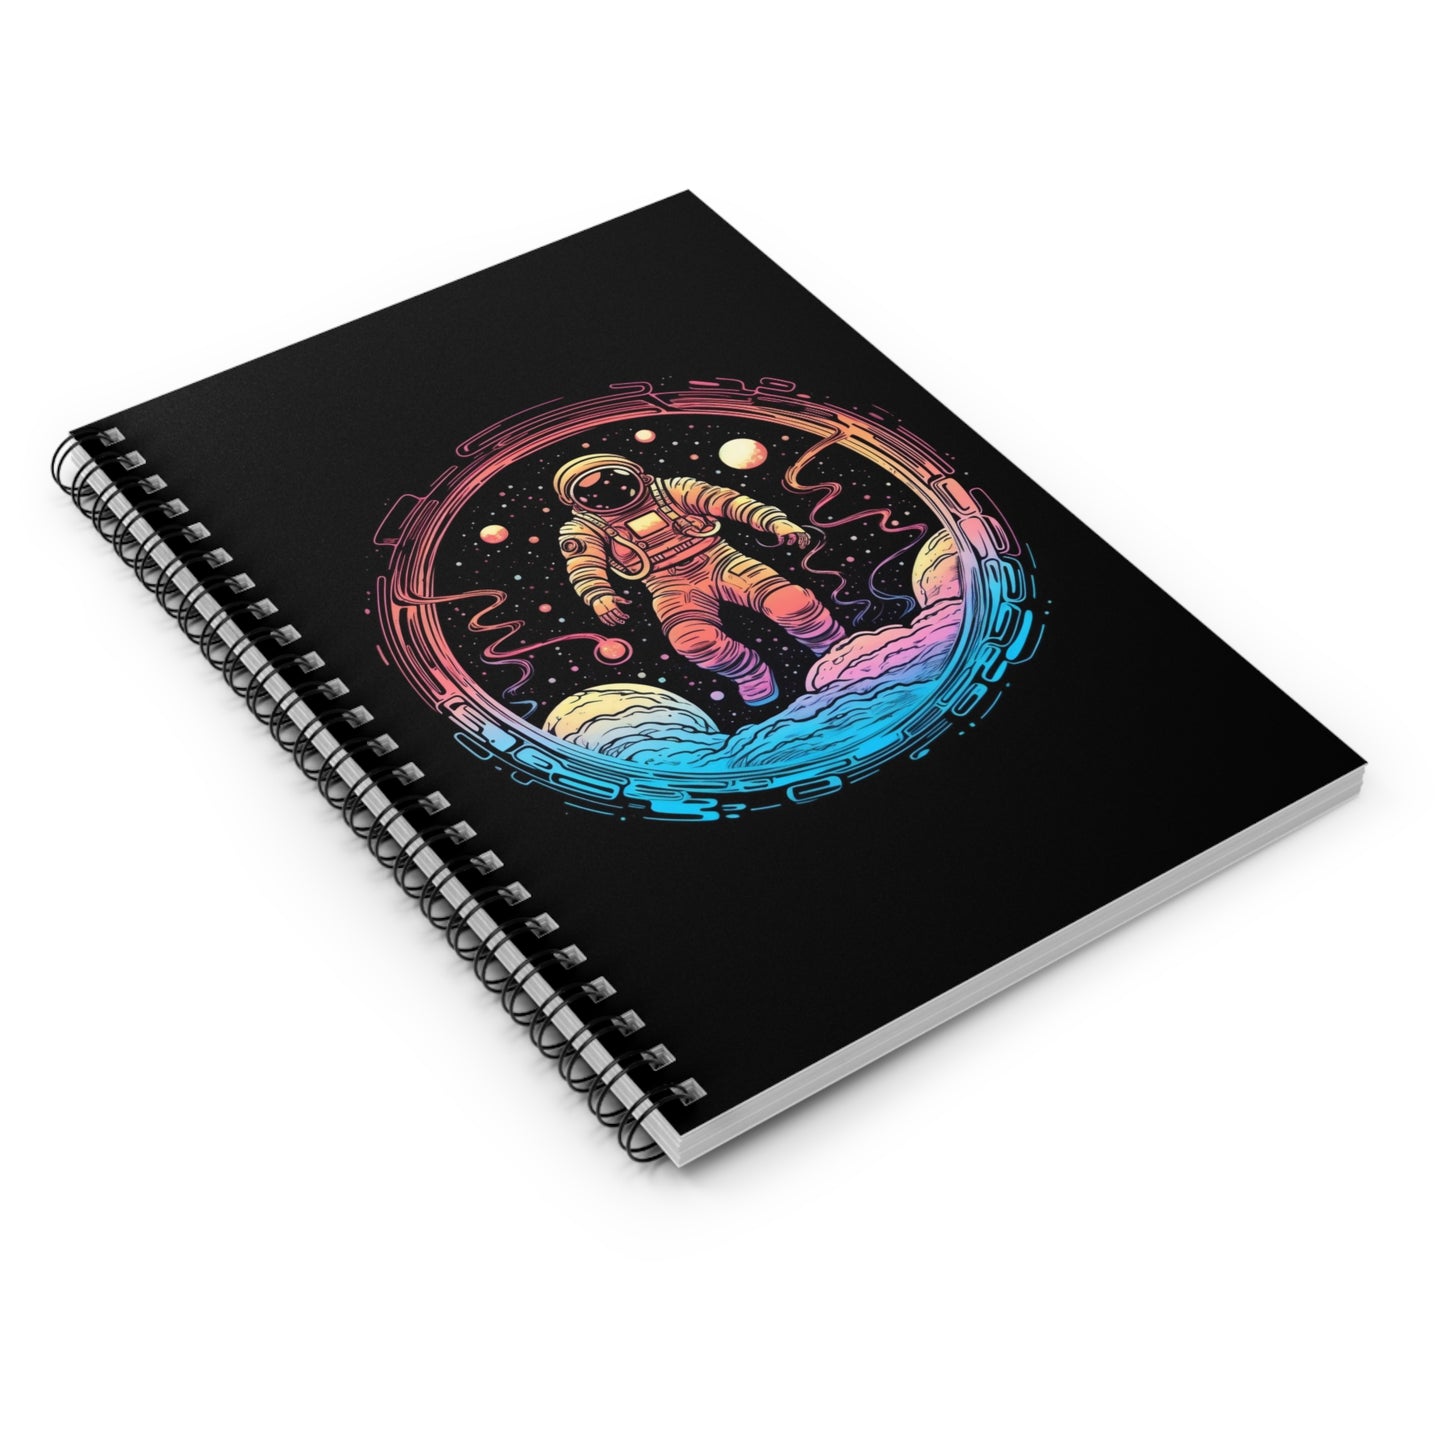 Astronaut Diary, Space Journal, Sci-Fi Spiral Notebook, Galactic Adventures Journal, Astronomy Notes, Dream Journal, Ruled Line